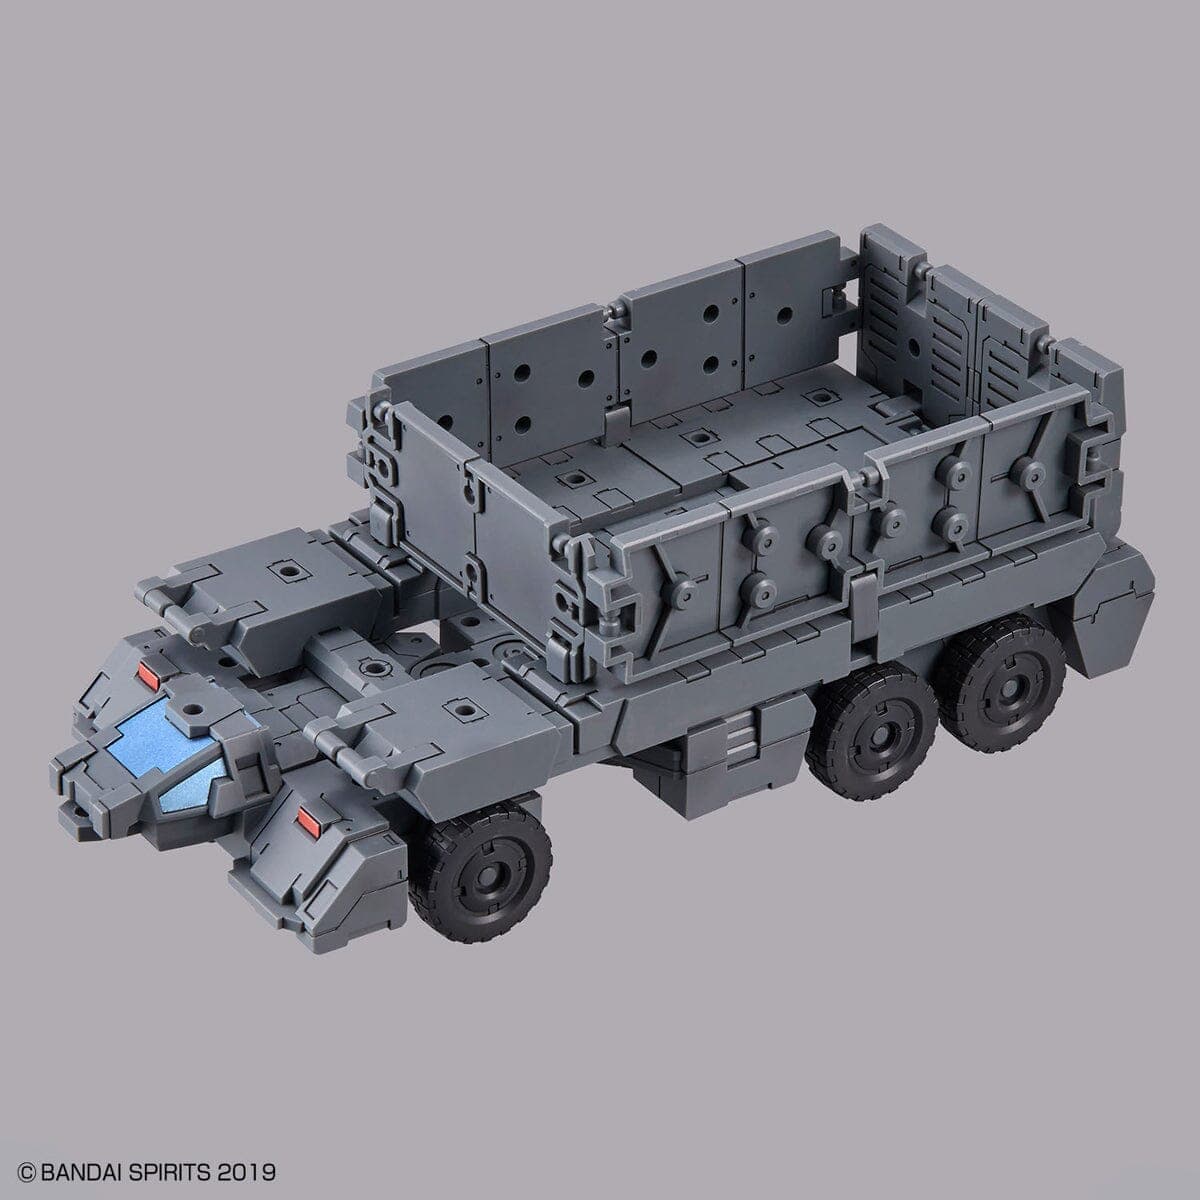 Bandai Scale Model Kits 1/144 30MM EV-13 Extended Armament Vehicle (Customize Carrier Ver.)